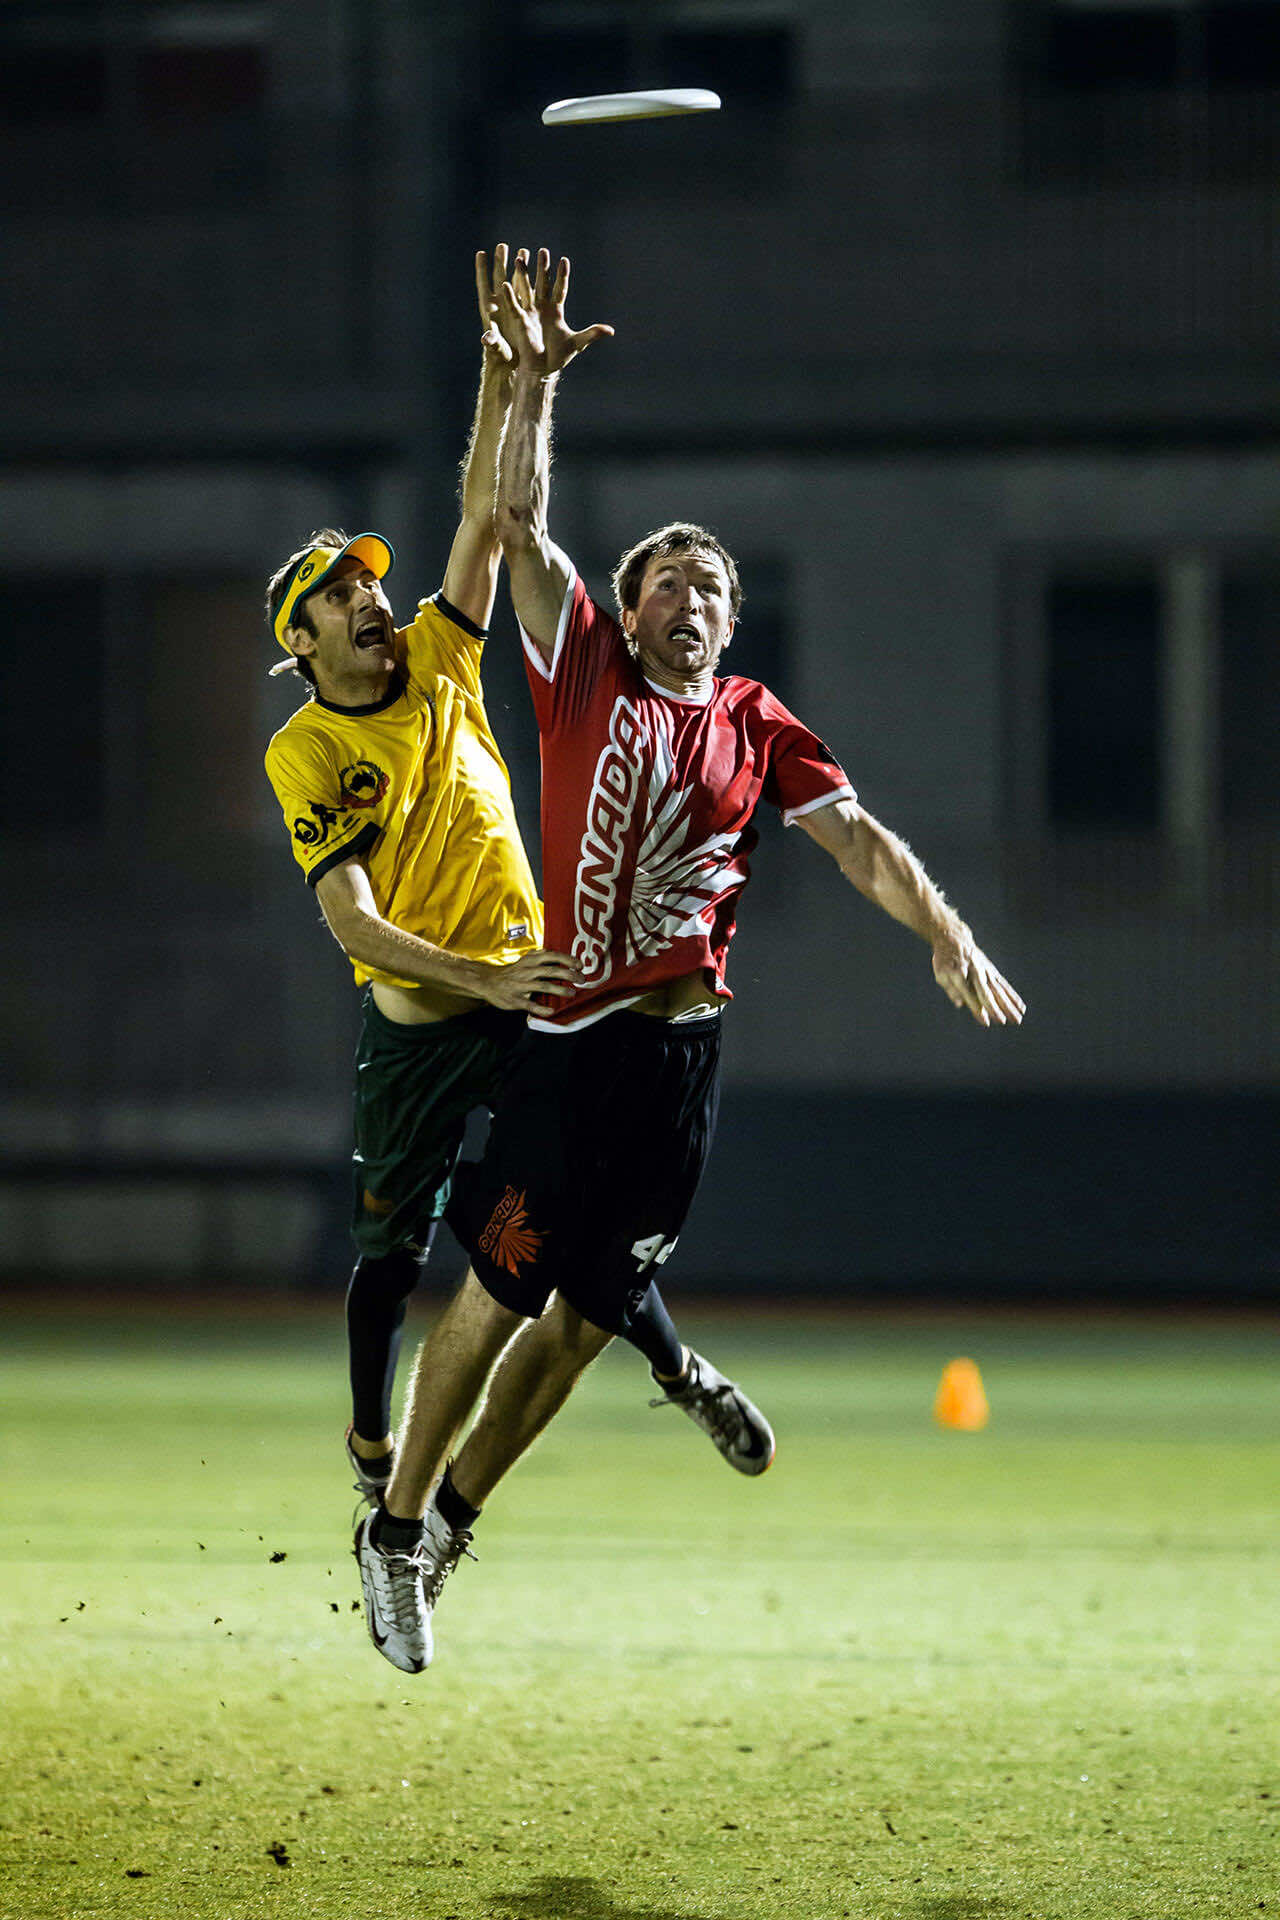 two men playing ultimate frisbee